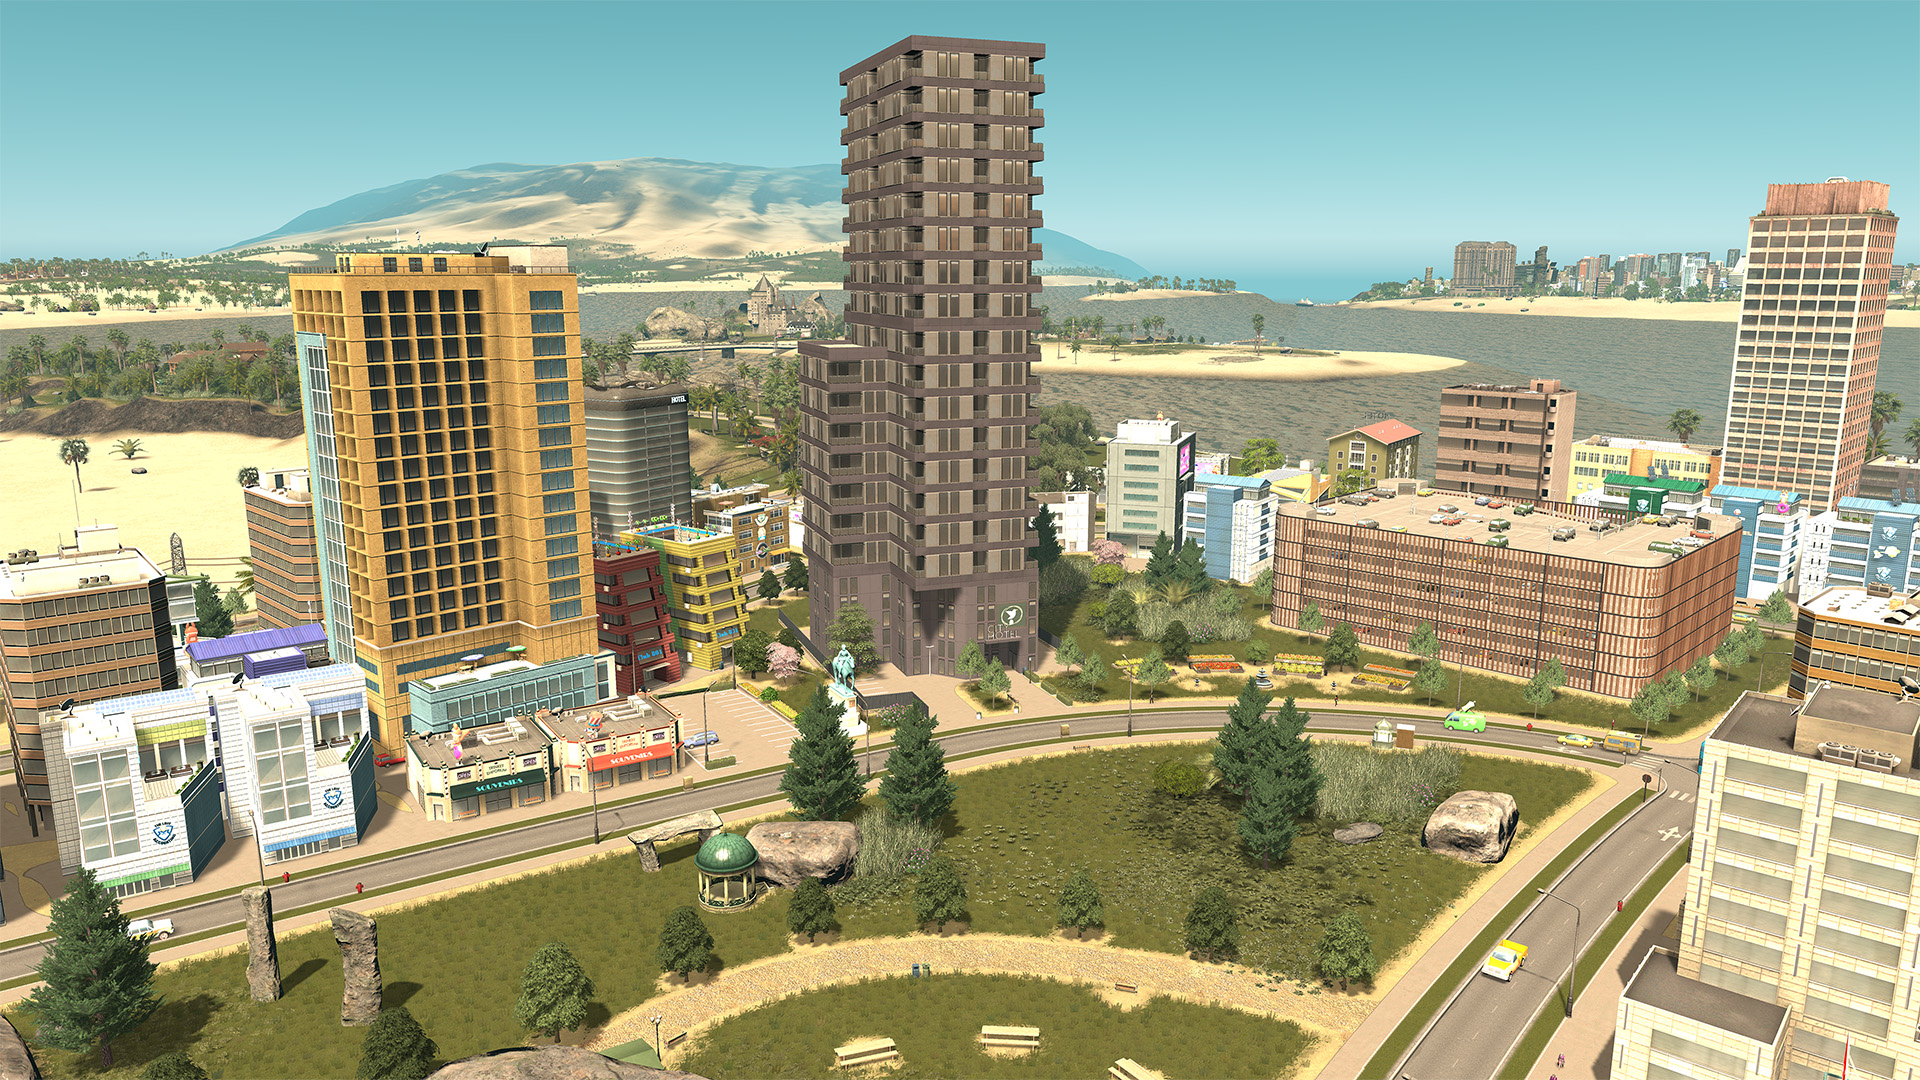 Hotels & Retreats is the final expansion for Cities: Skylines